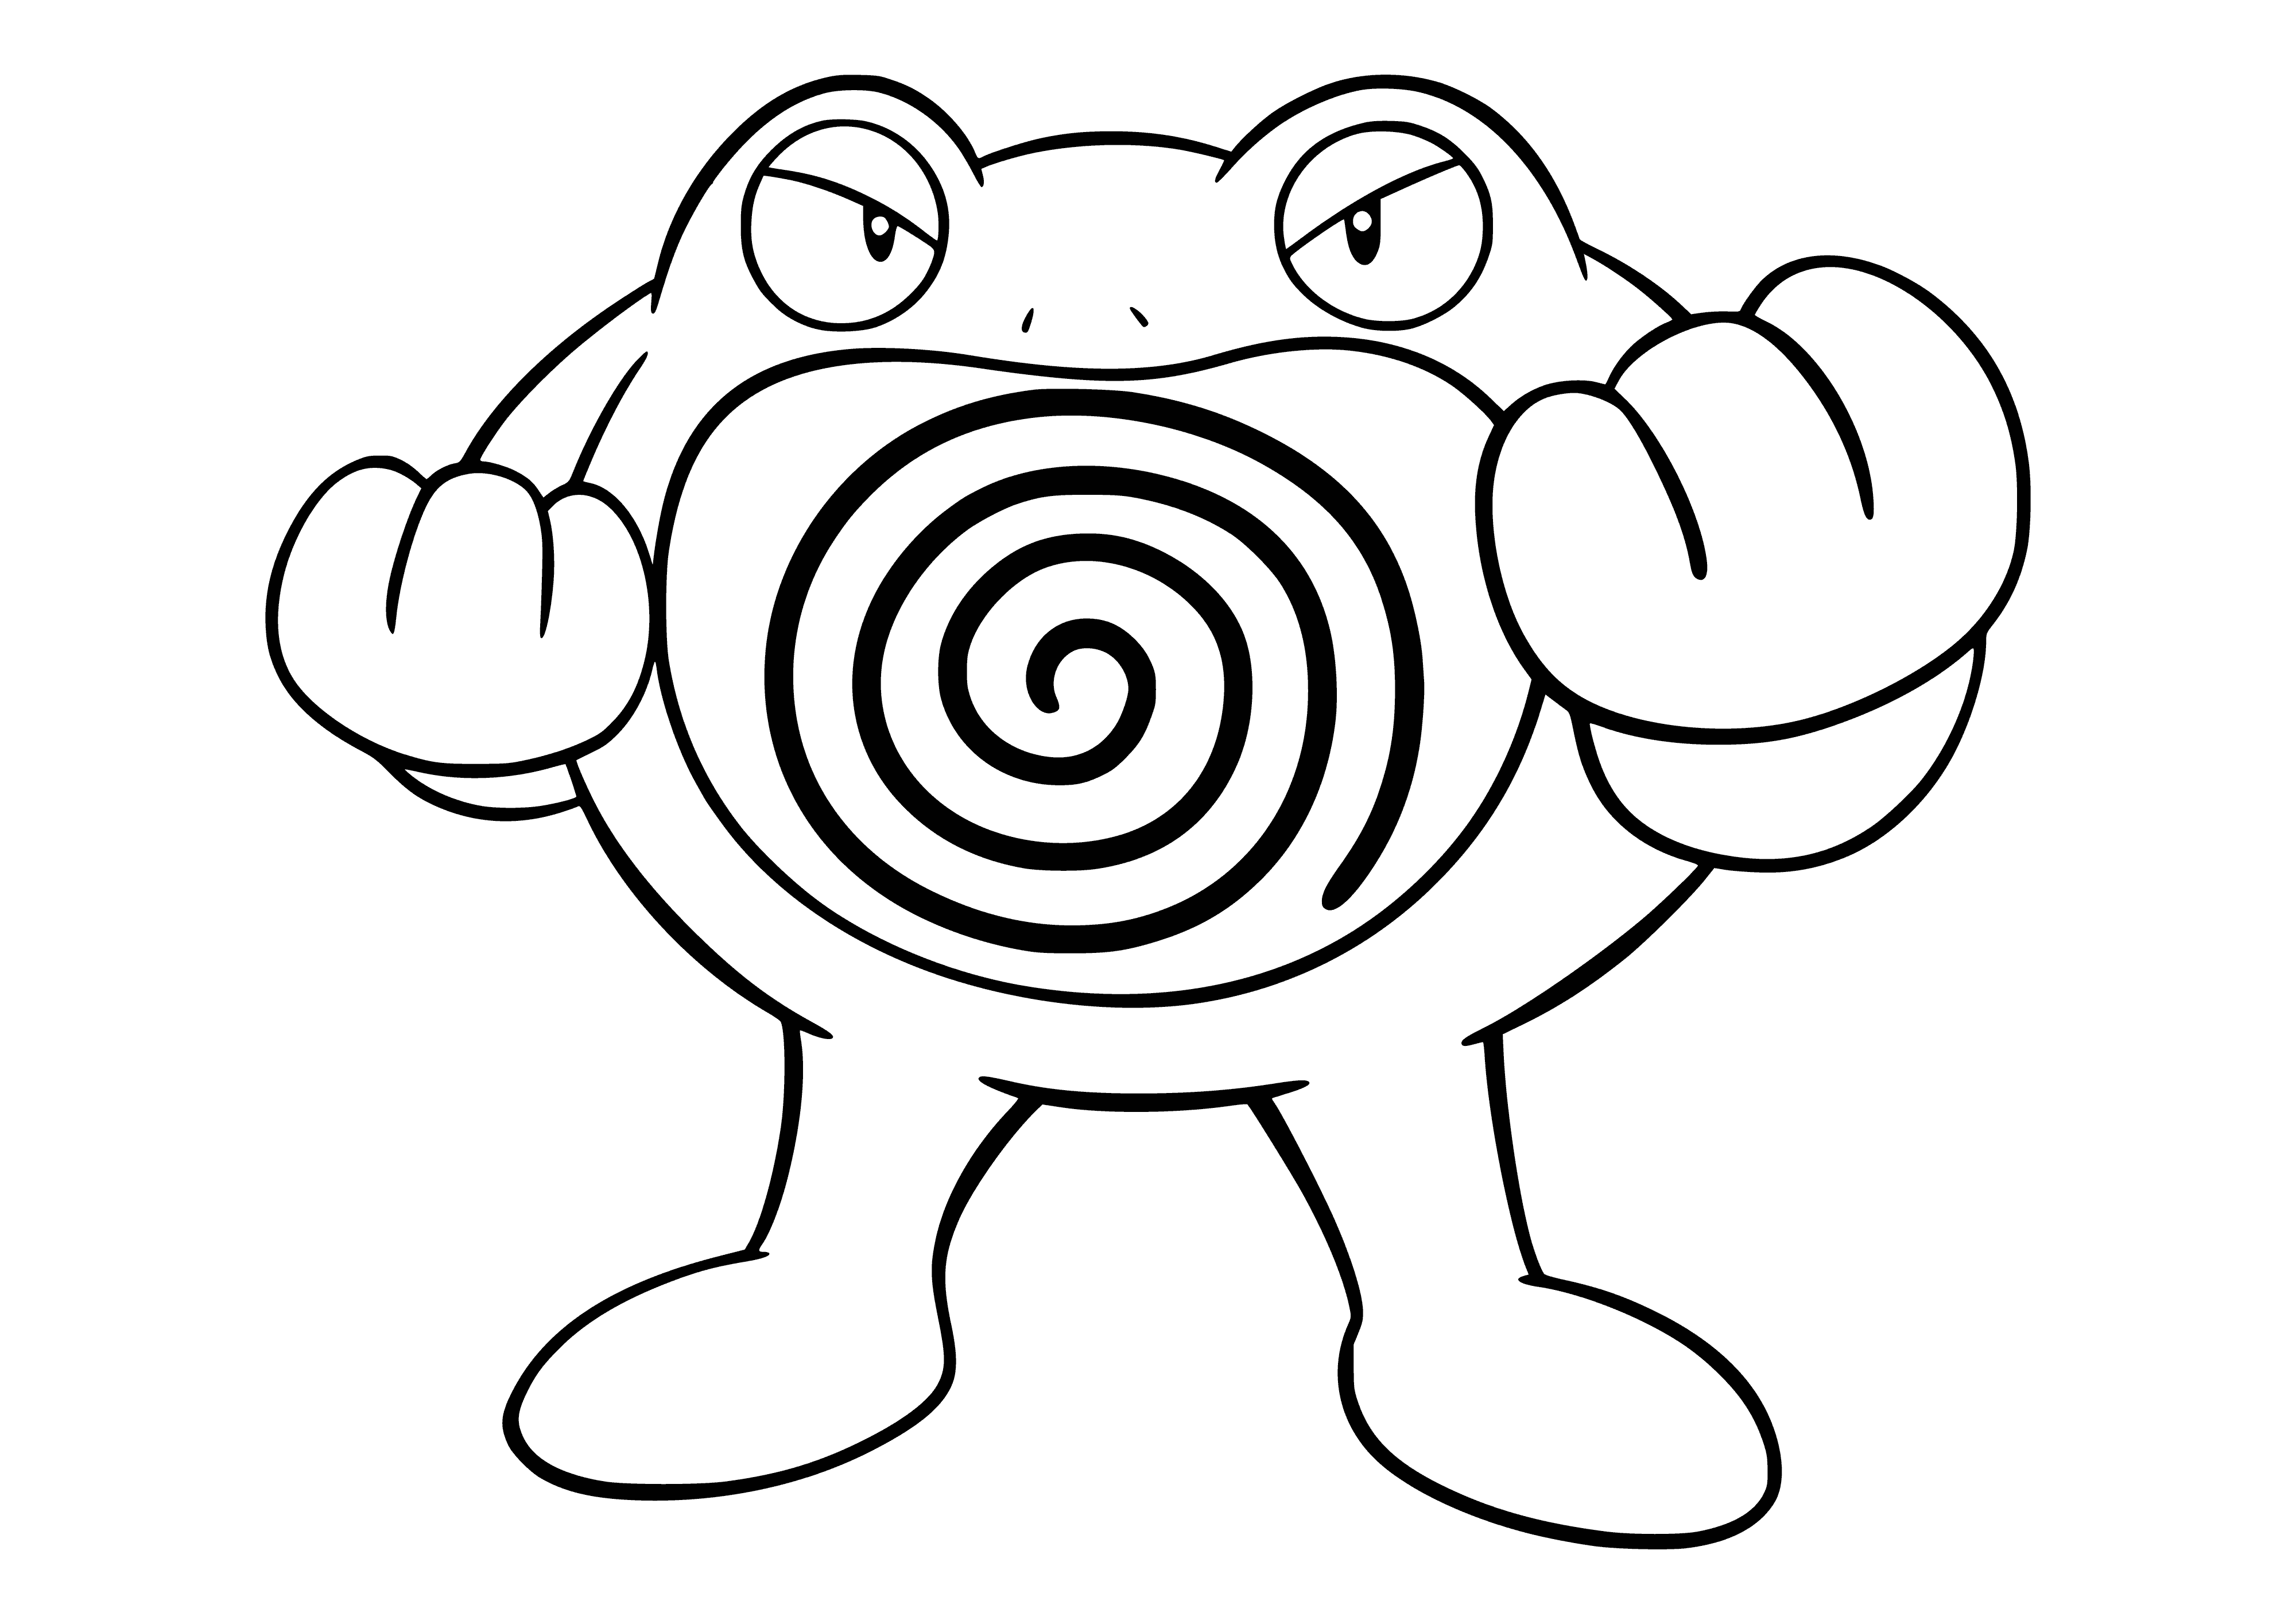 coloring page: Blue frog-like Pokemon with red eyes, white belly, triangle forehead and webbed hands/feet. 3 black spots on its back.